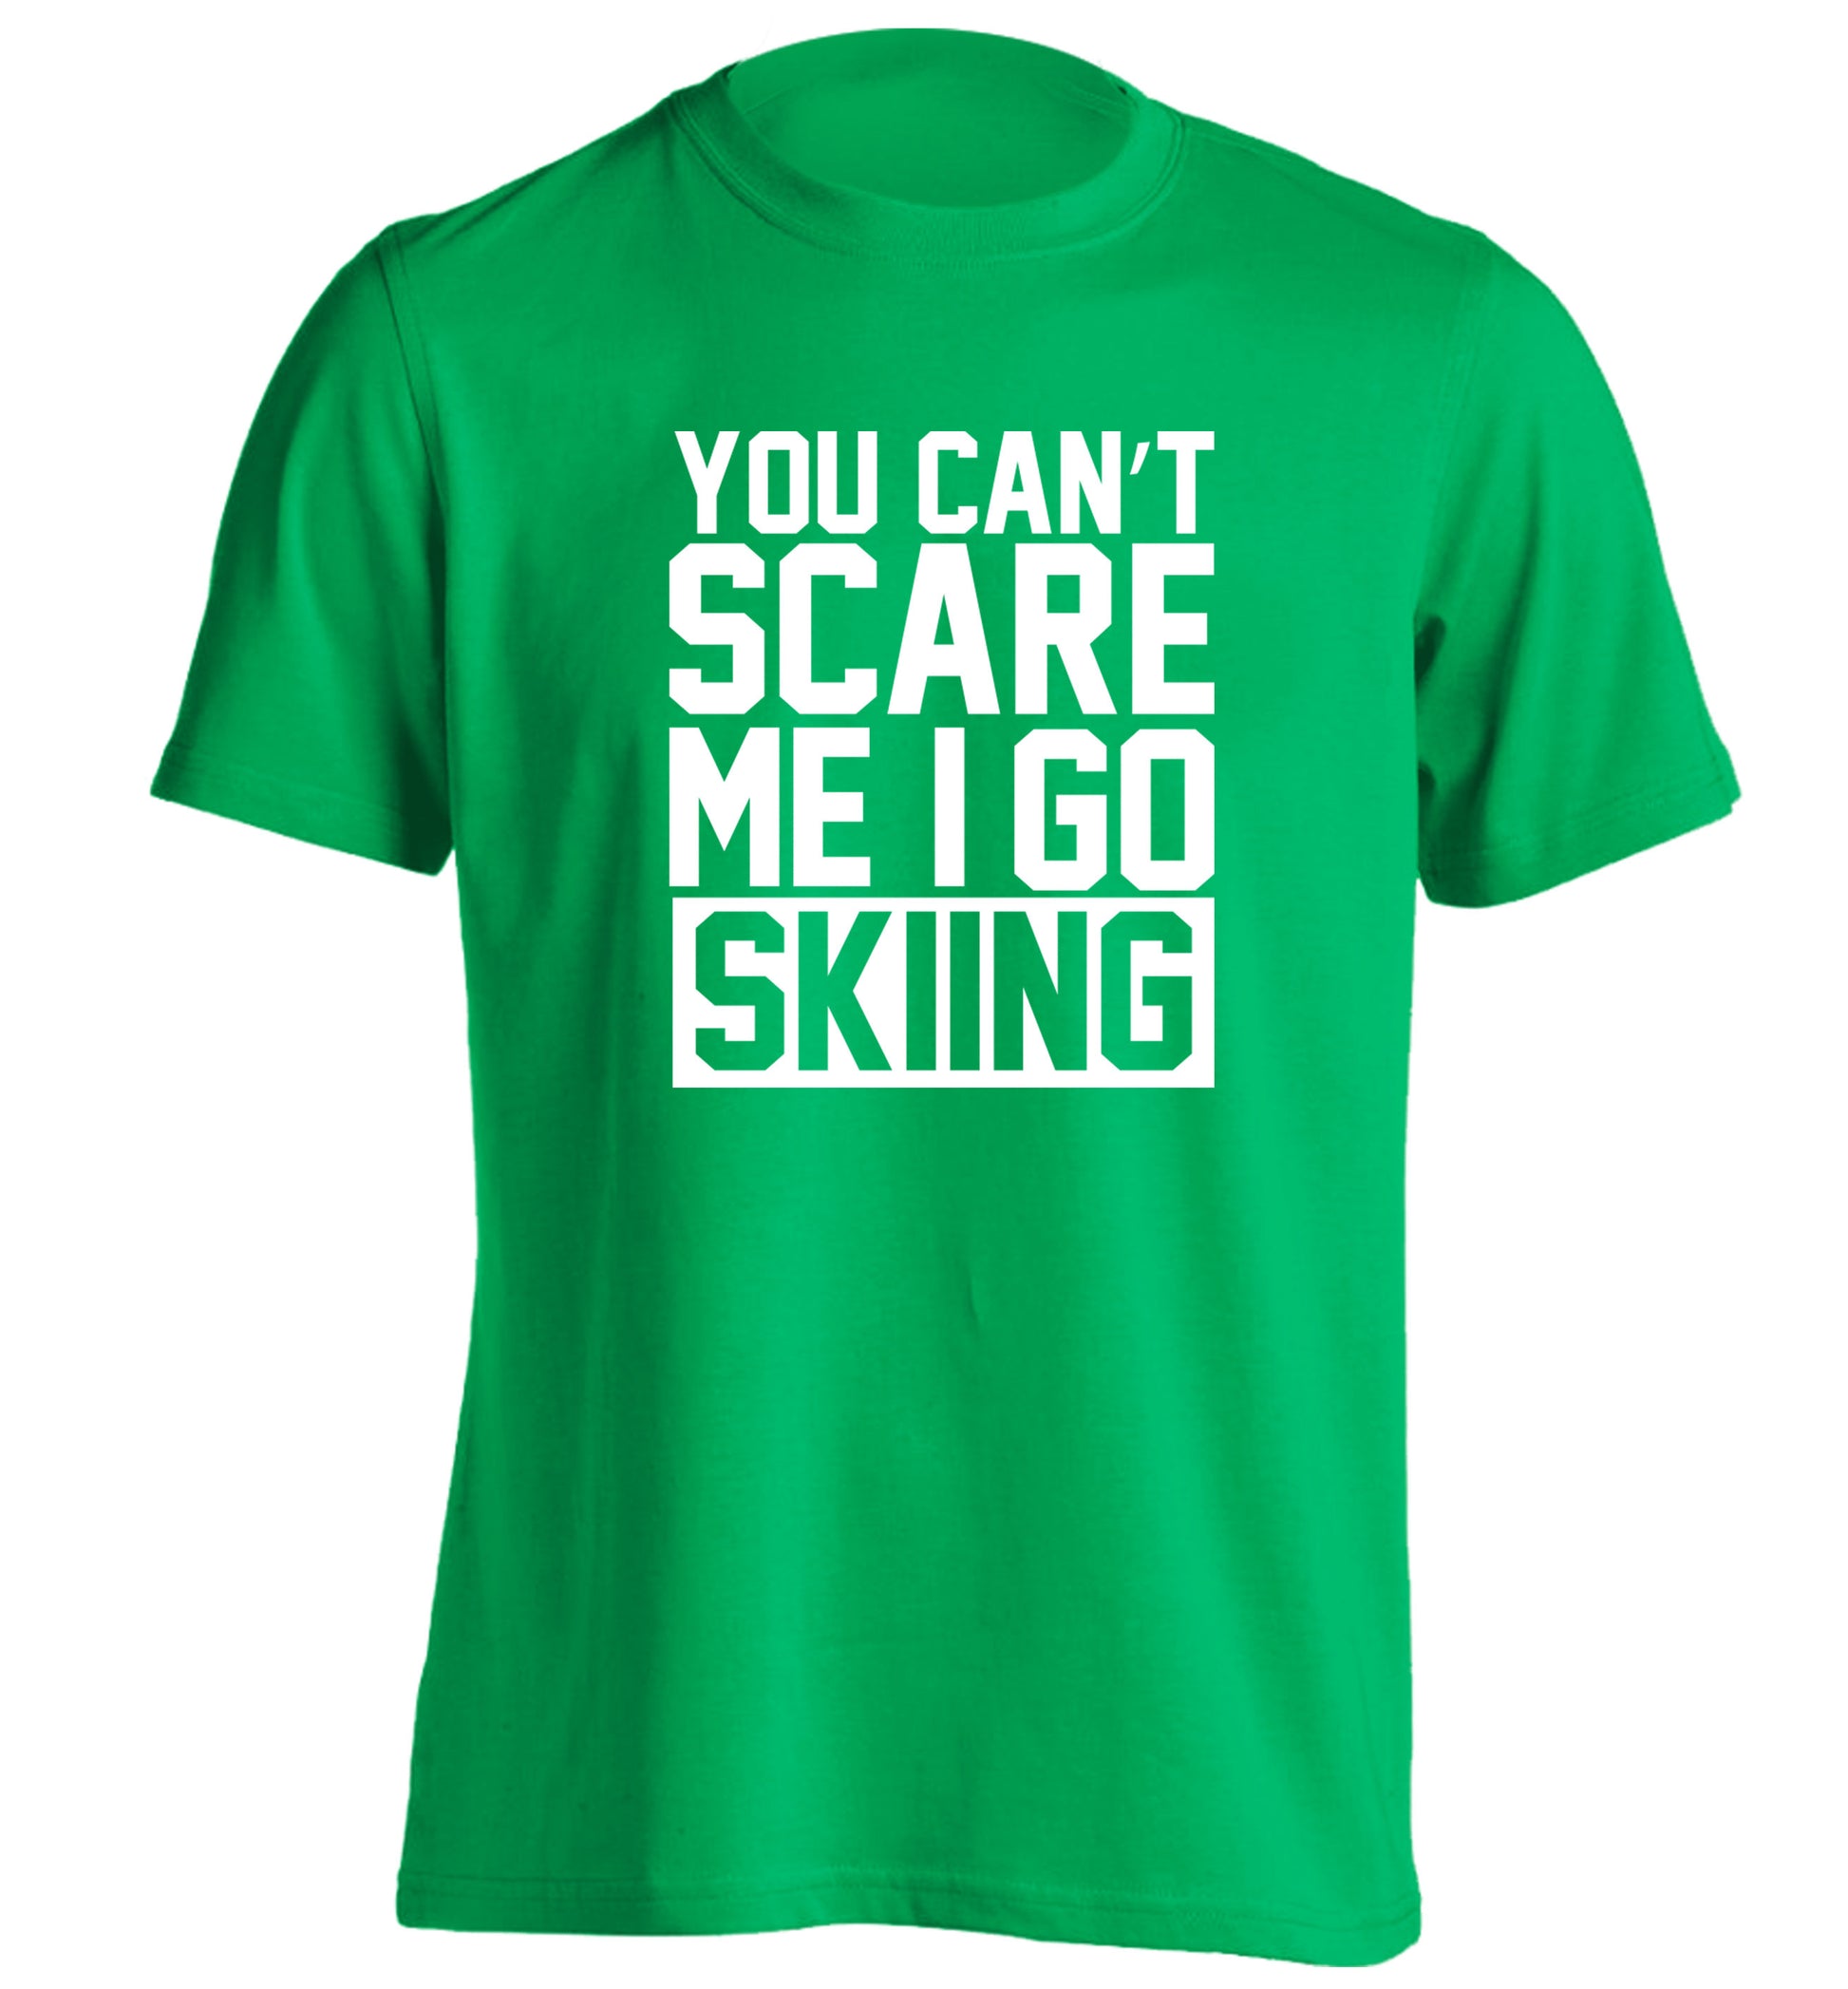 You can't scare me I go skiing adults unisex green Tshirt 2XL